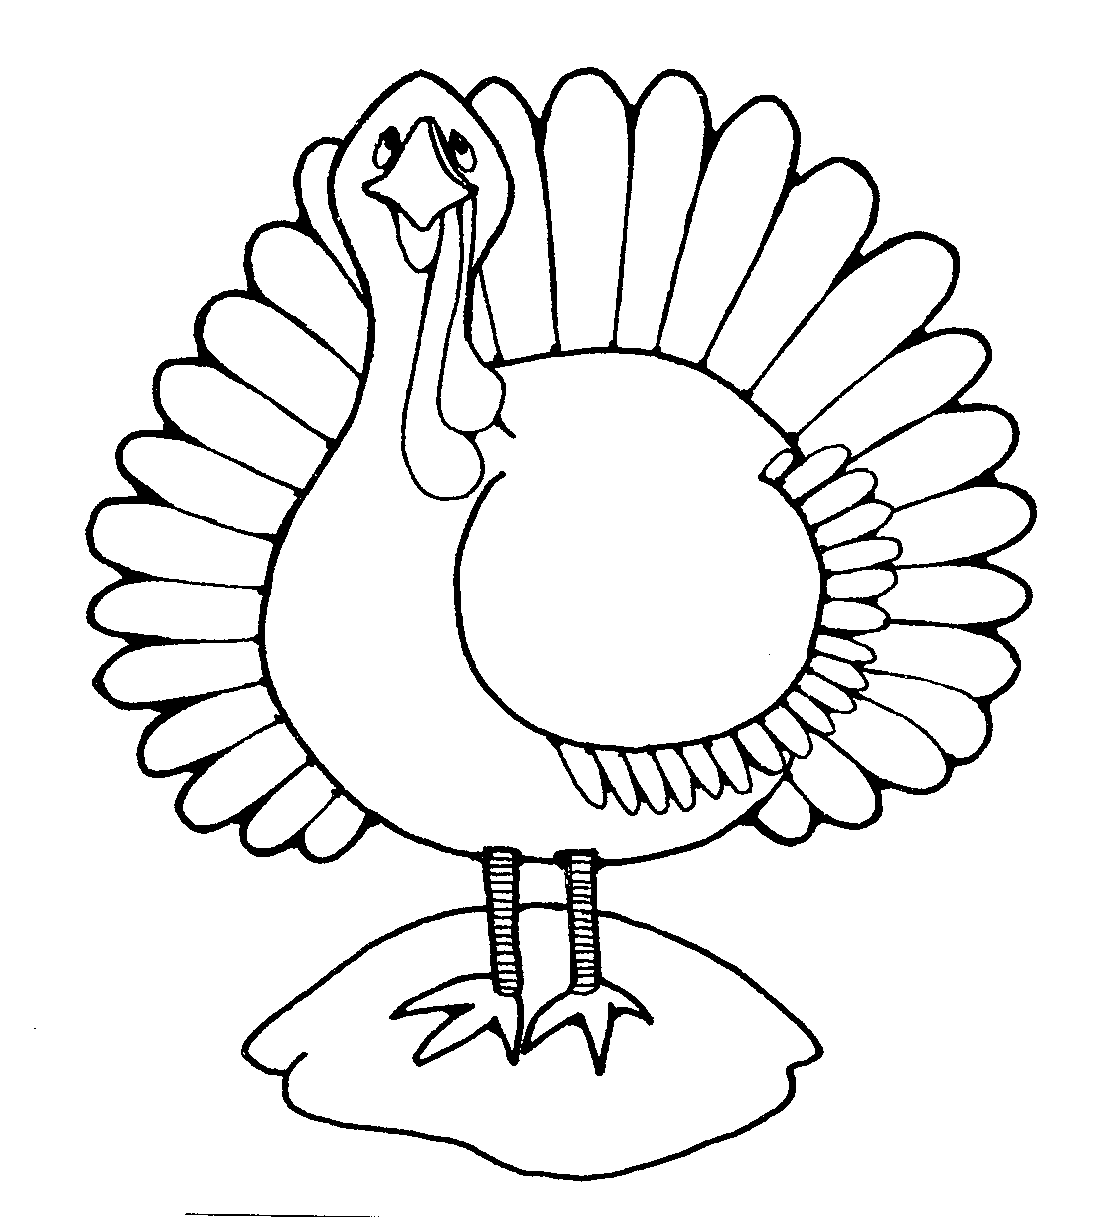 Thanksgiving coloring pages crafts - Coloring Pages & Pictures ...